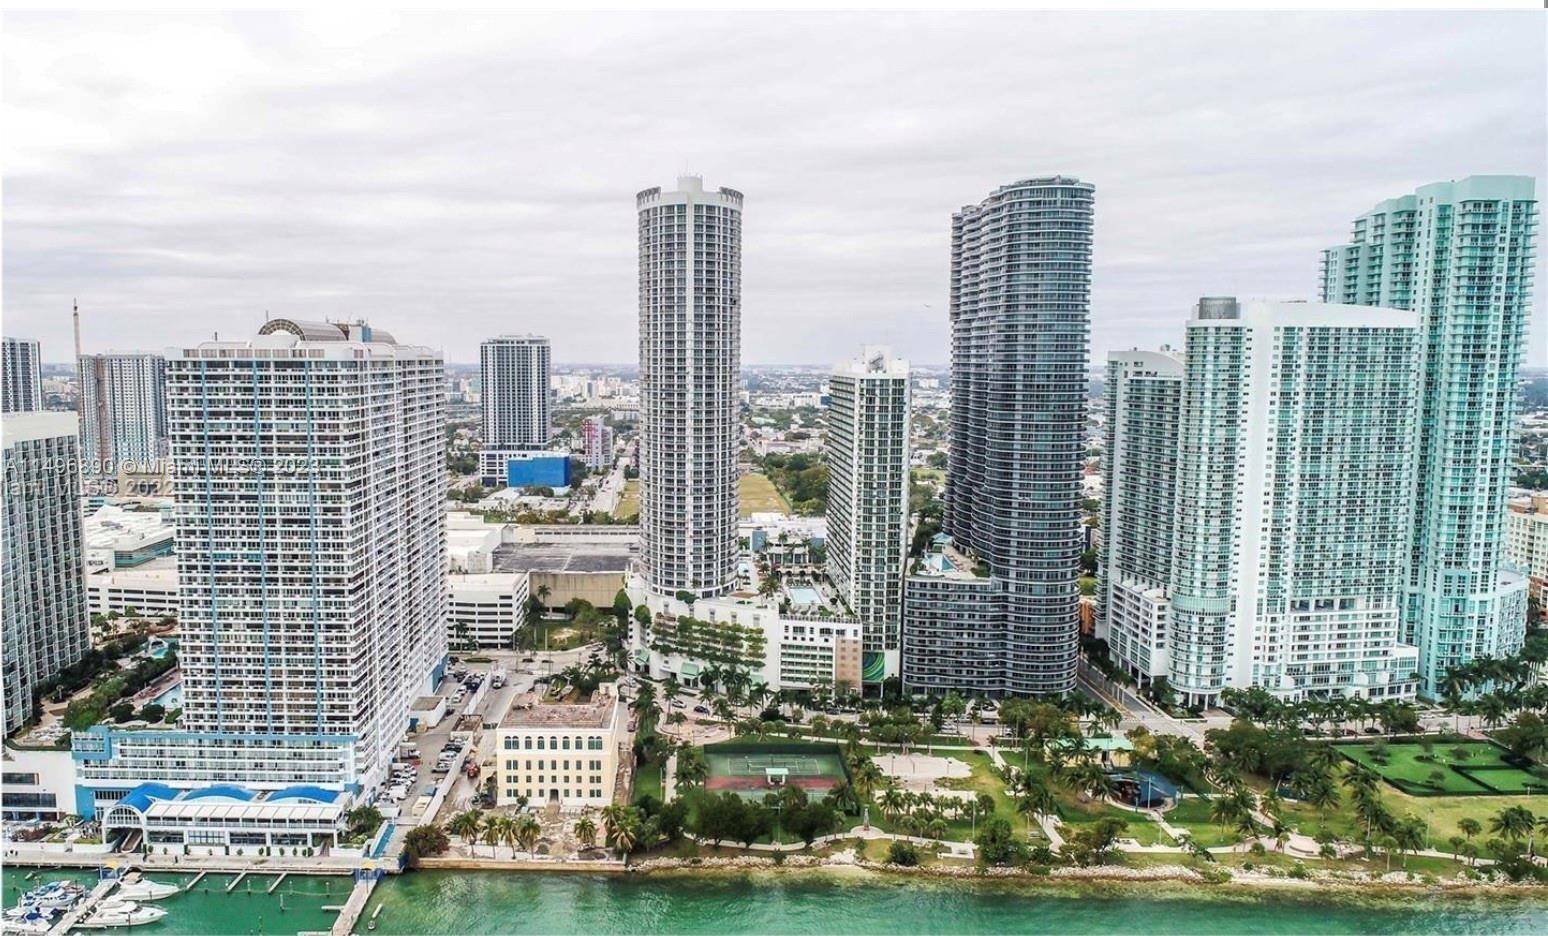 This beautiful 2 Bedroom 2 Bathroom unit with incredible Miami Downtown and Brickell view features marble floors, SS appliances, and a washer dryer inside the unit.